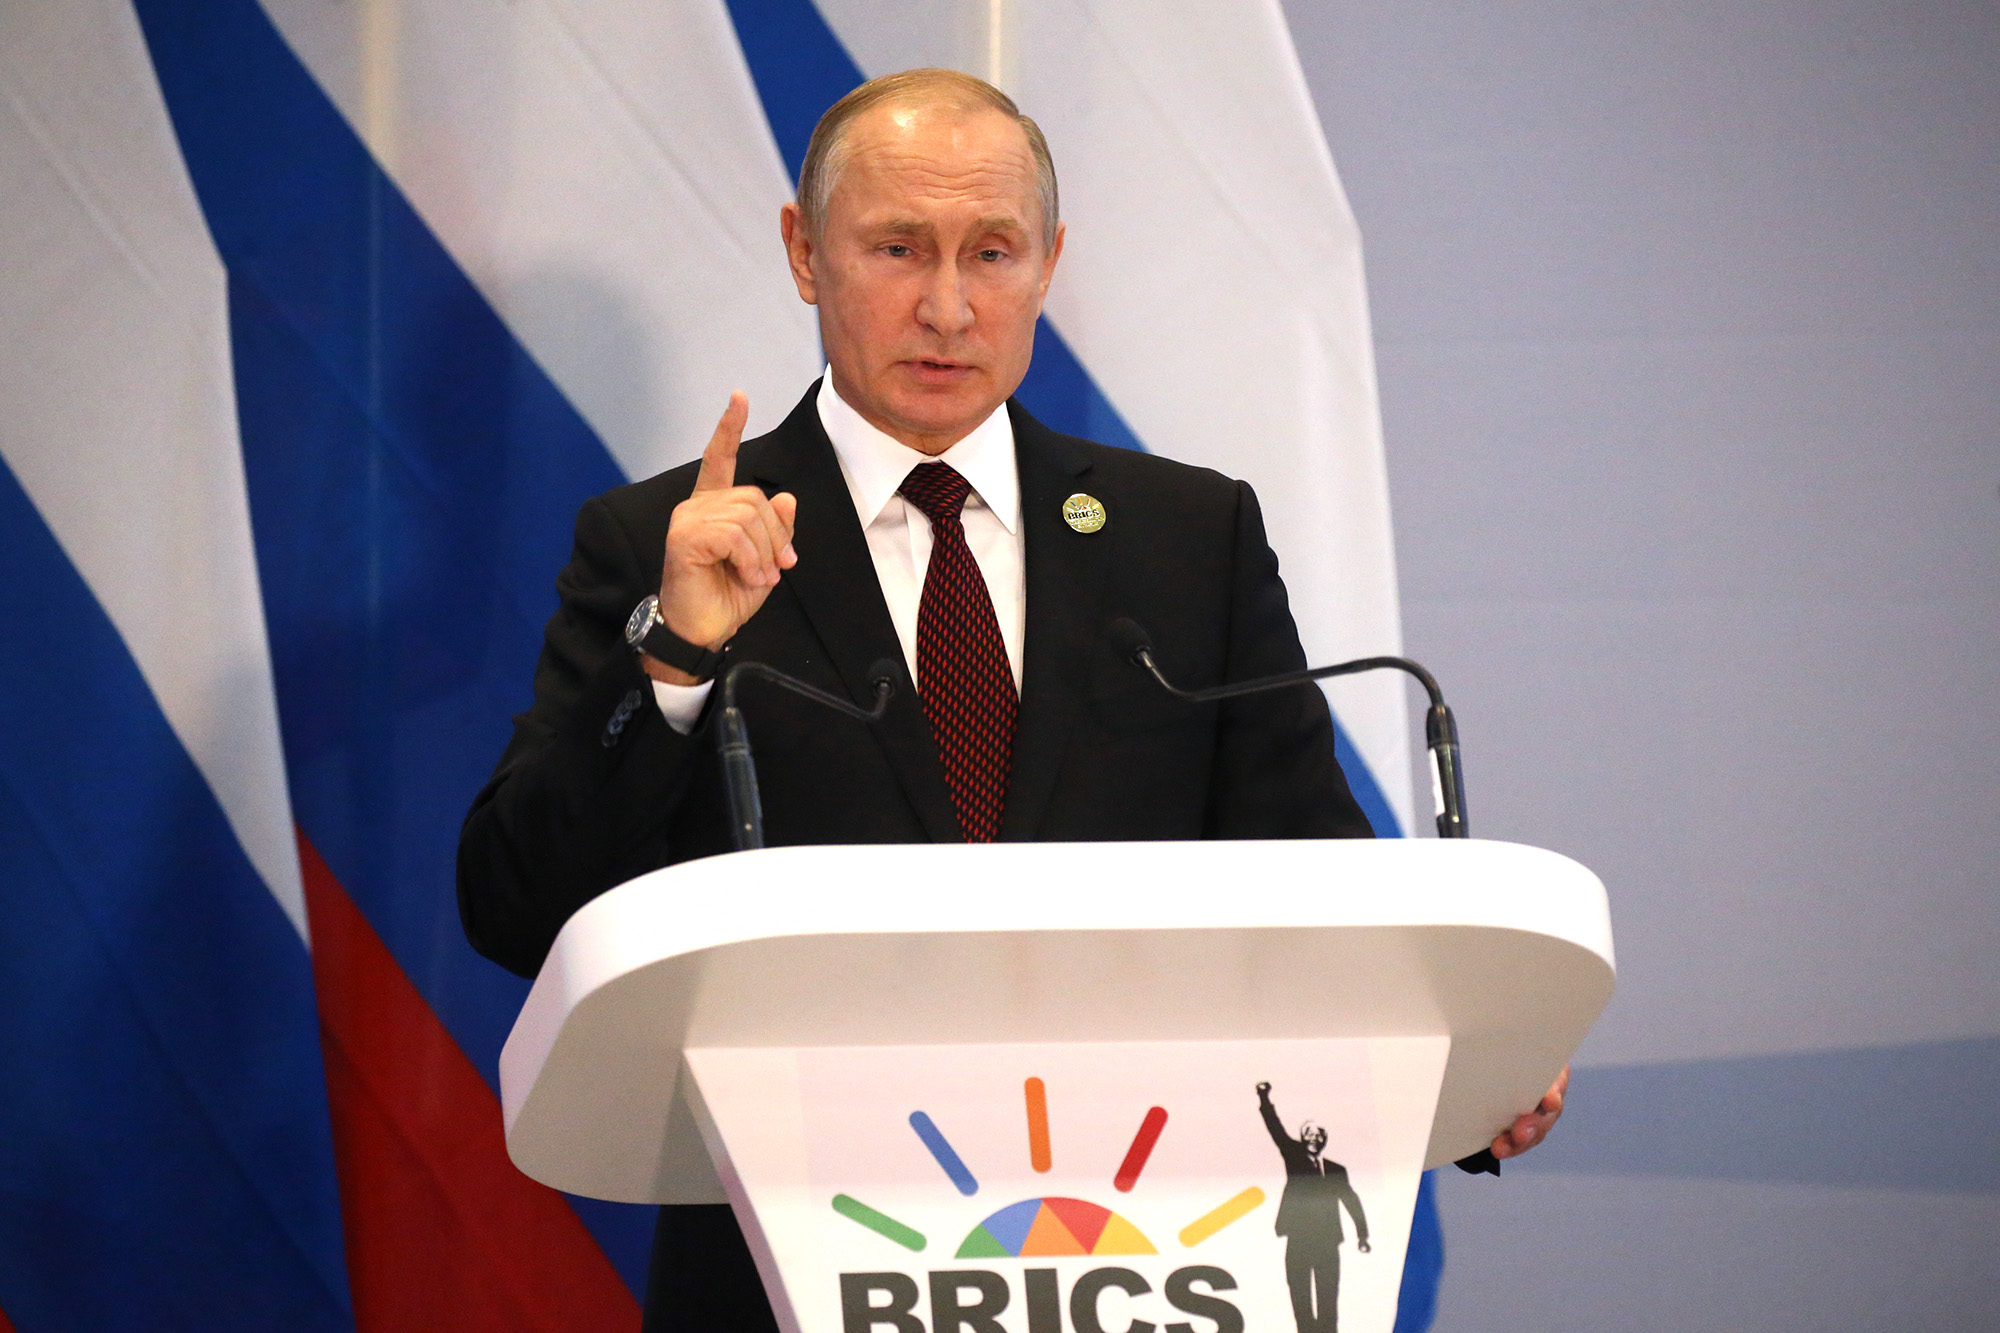 Russian President Vladimir Putin speaks during a press conference at the BRICS Summit on July 27, 2018 in Johannesburg, South Africa. 